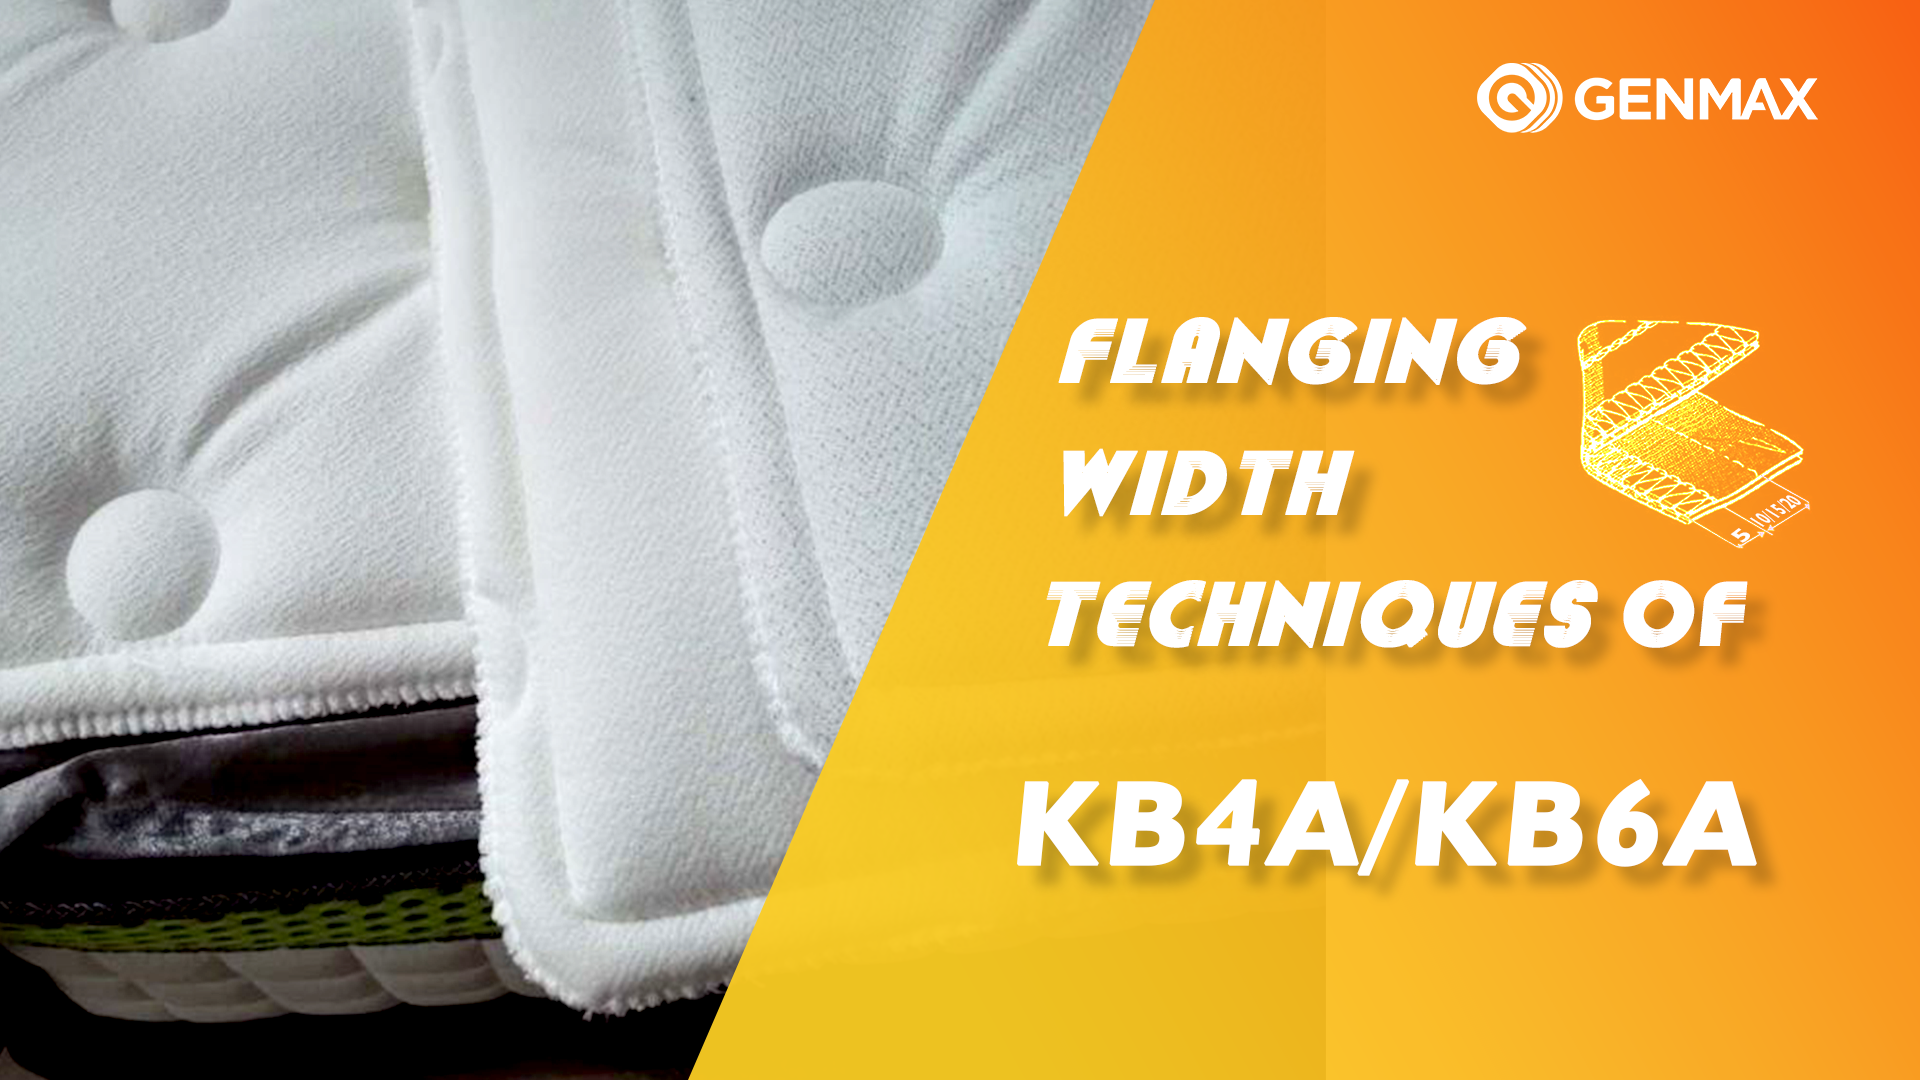 Flanging width techniques of KB1A/KB4A/KB6A((Multifunction Flanging Machine))